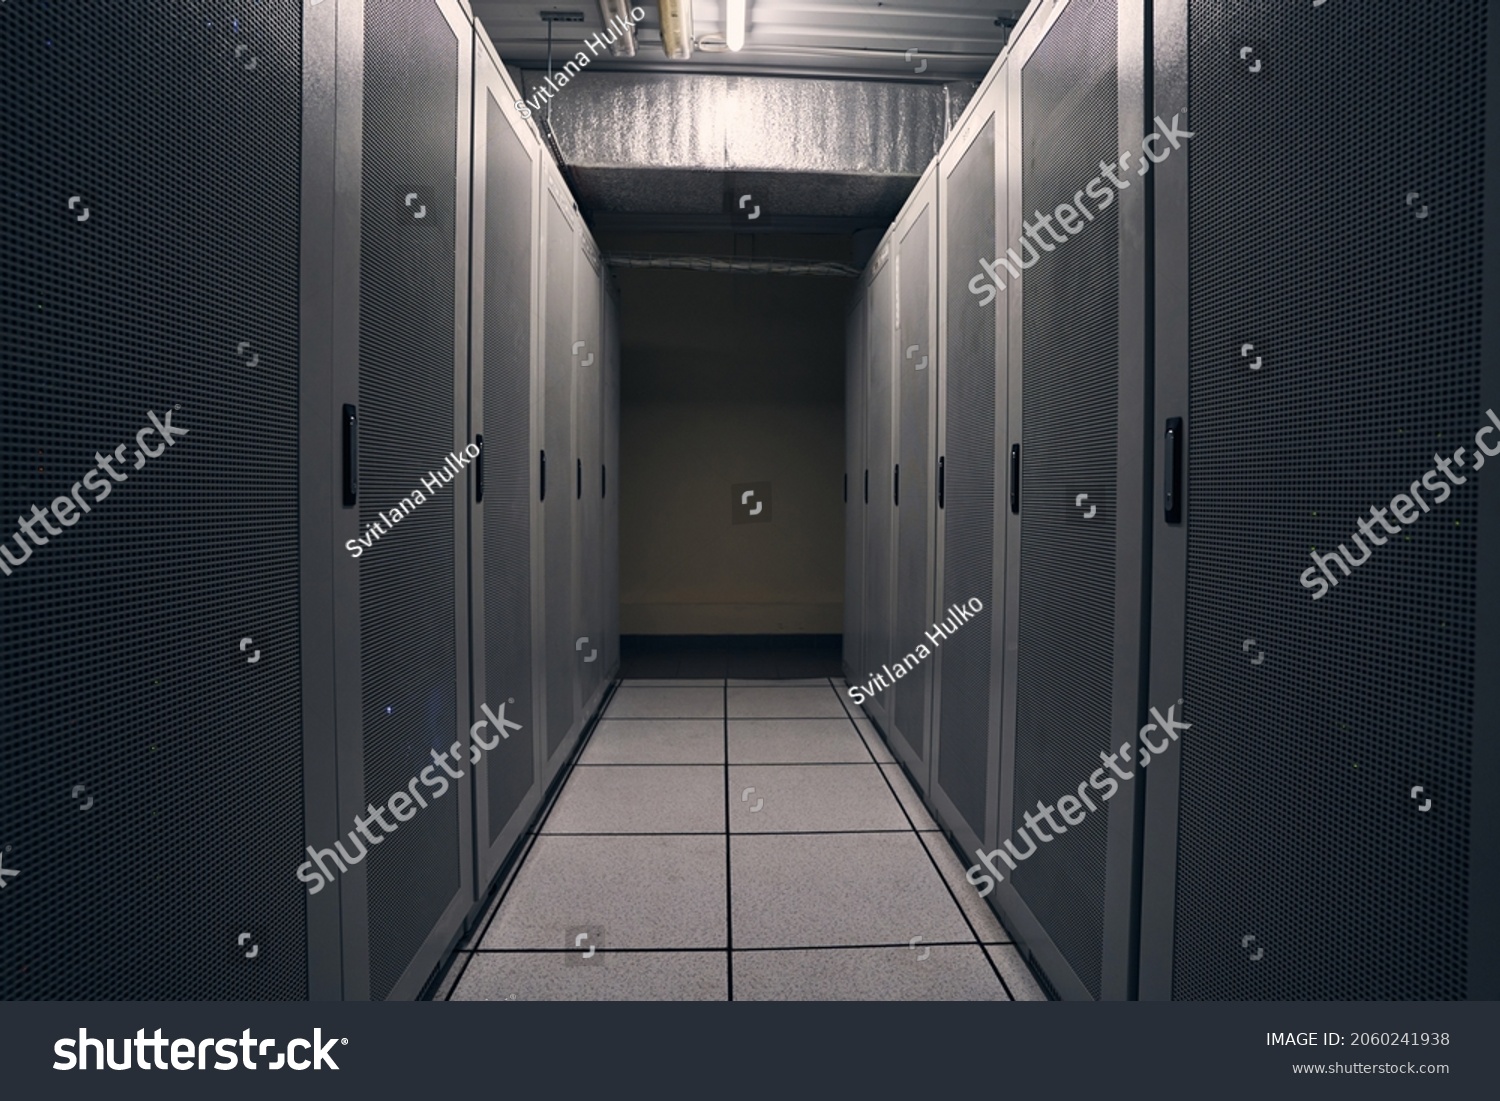 State-of-the-art colocation data center with IT equipment #2060241938